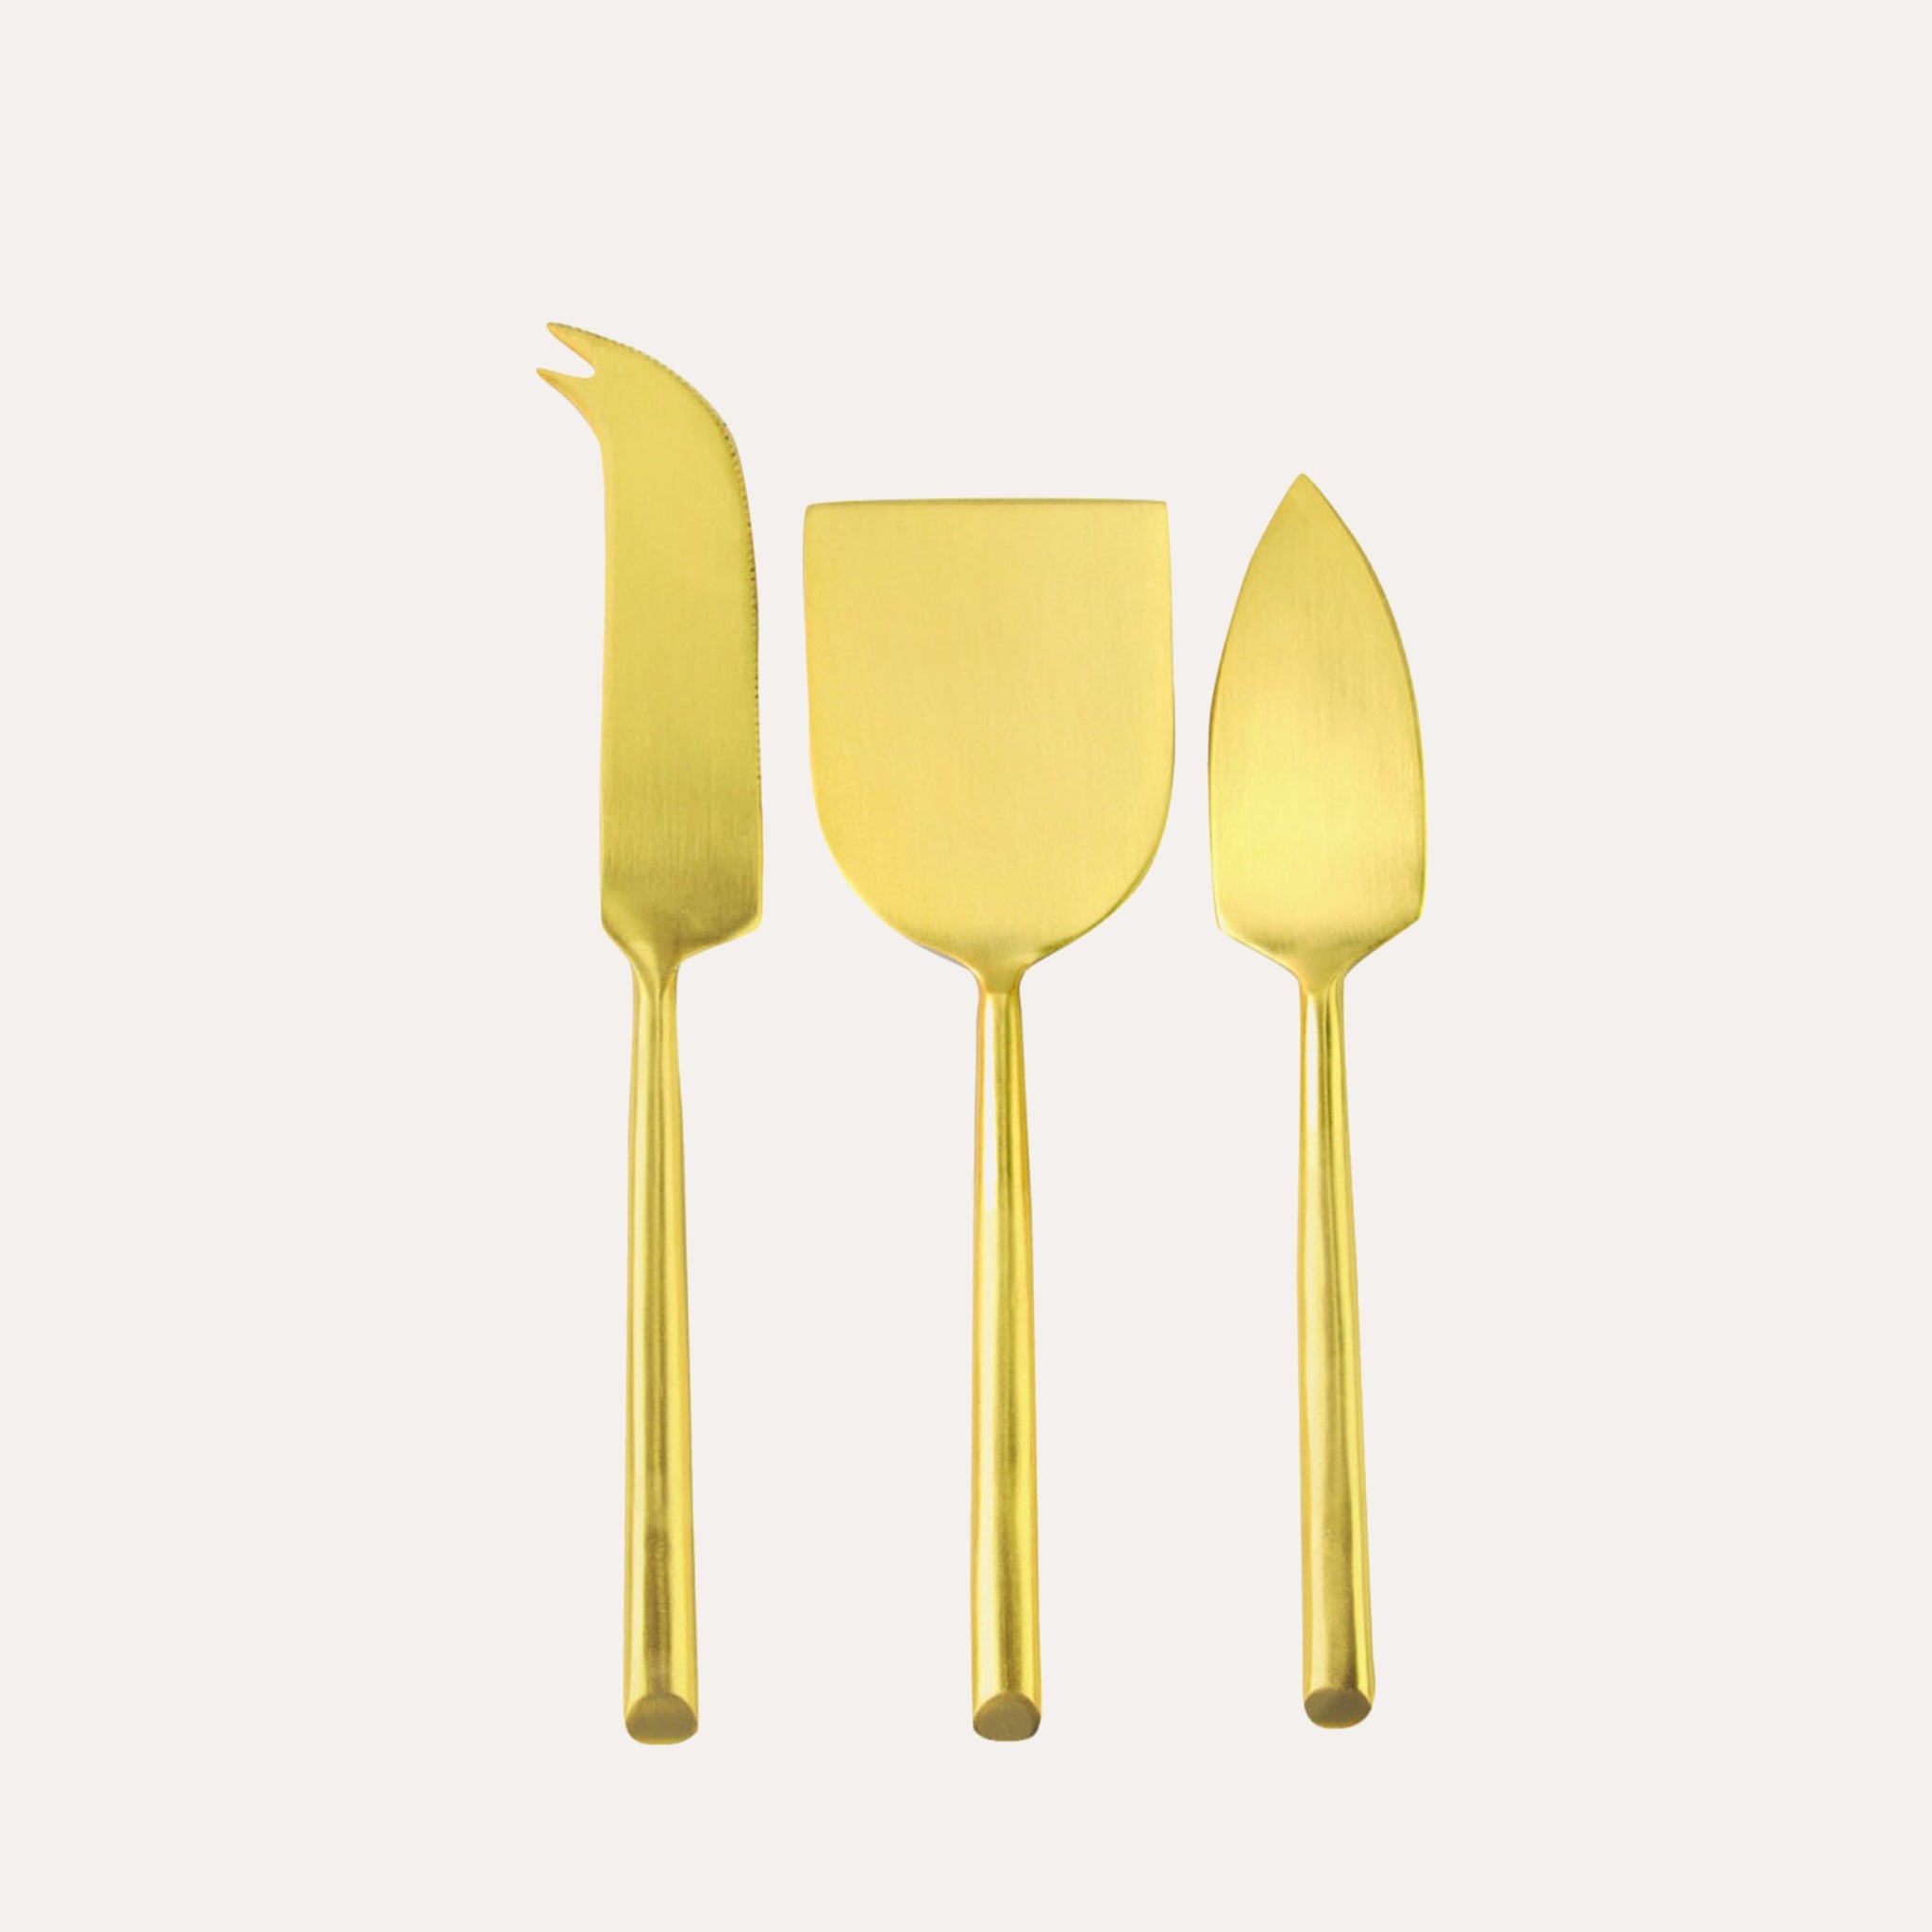 Matte Gold Cheese Knives, Set of 3 – Be Home